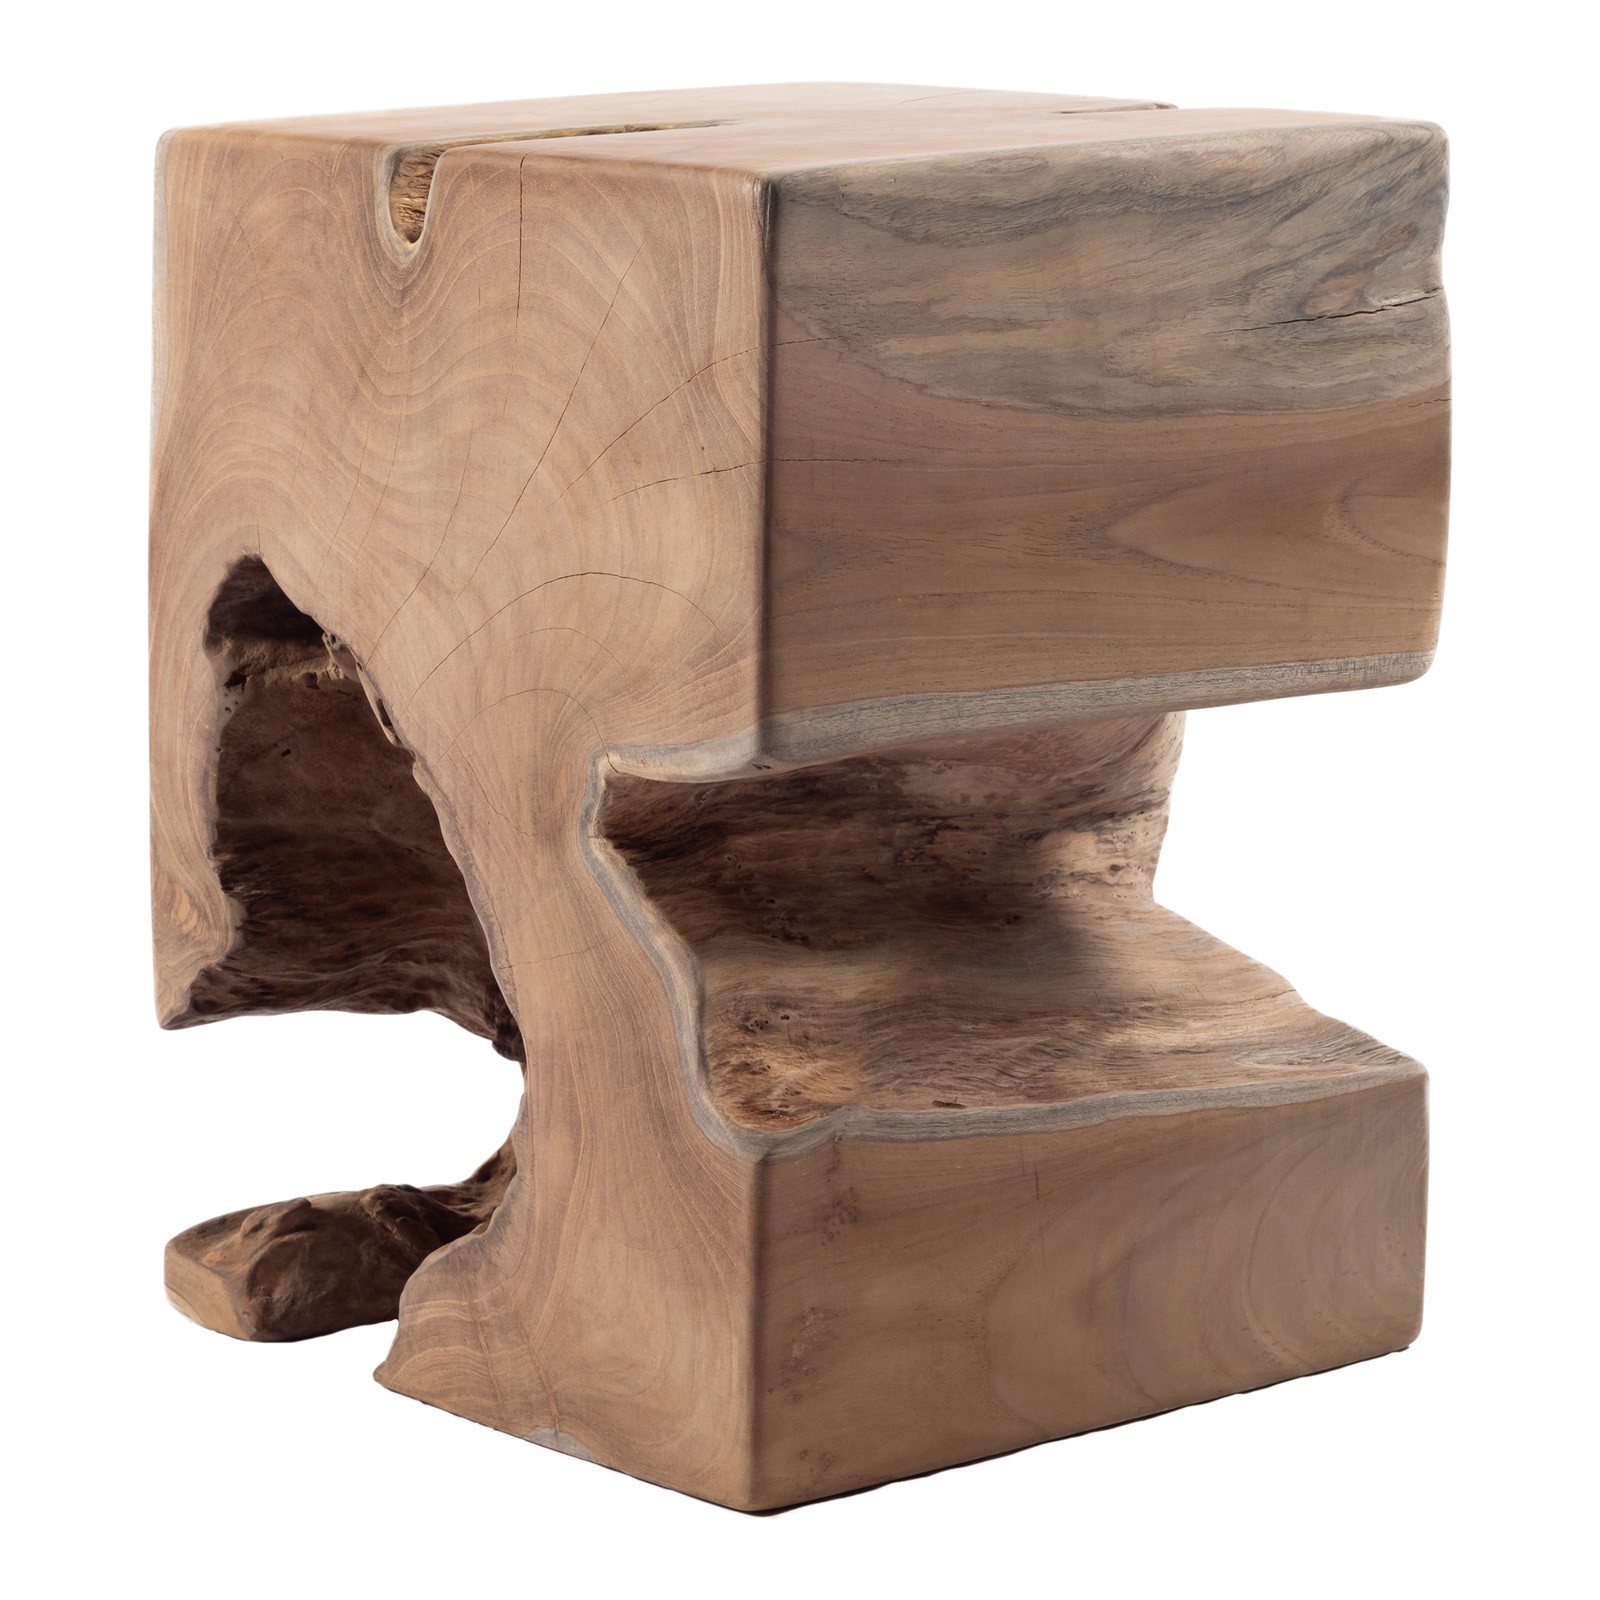 Moes home collection natural teak wood end table